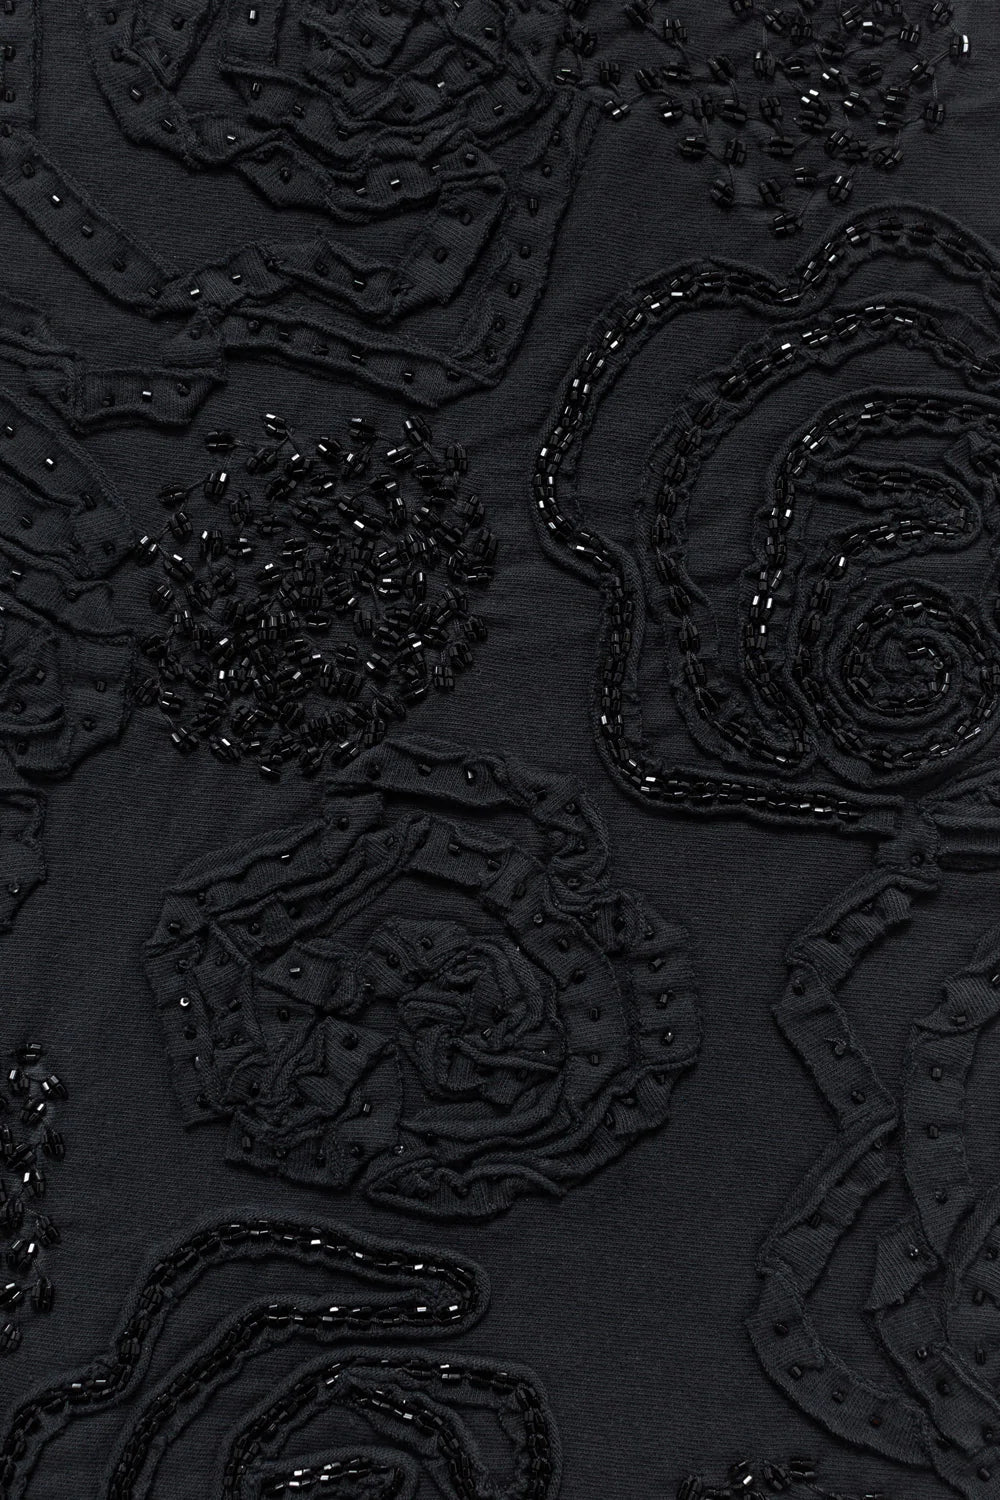 Detail of a swatch featuring black rose appliqué on black fabric.